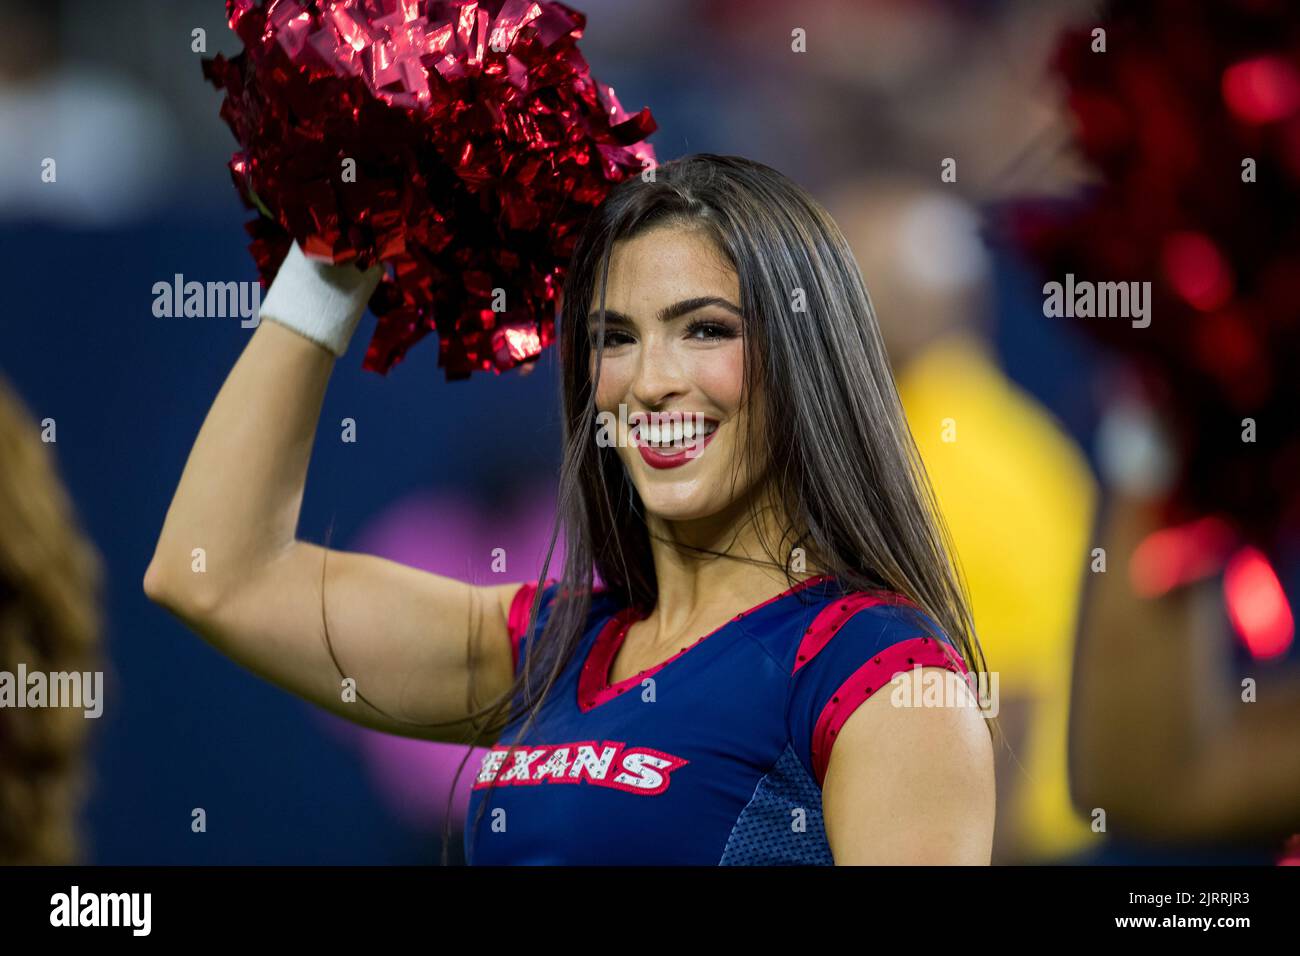 August 25, 2022: A Houston Texans Cheerleader performs during the 2nd quarter of an NFL football preseason game between the San Francisco 49ers and the Houston Texans at NRG Stadium in Houston, TX. The Texans won the game 17-0.Trask Smith/CSM Stock Photo